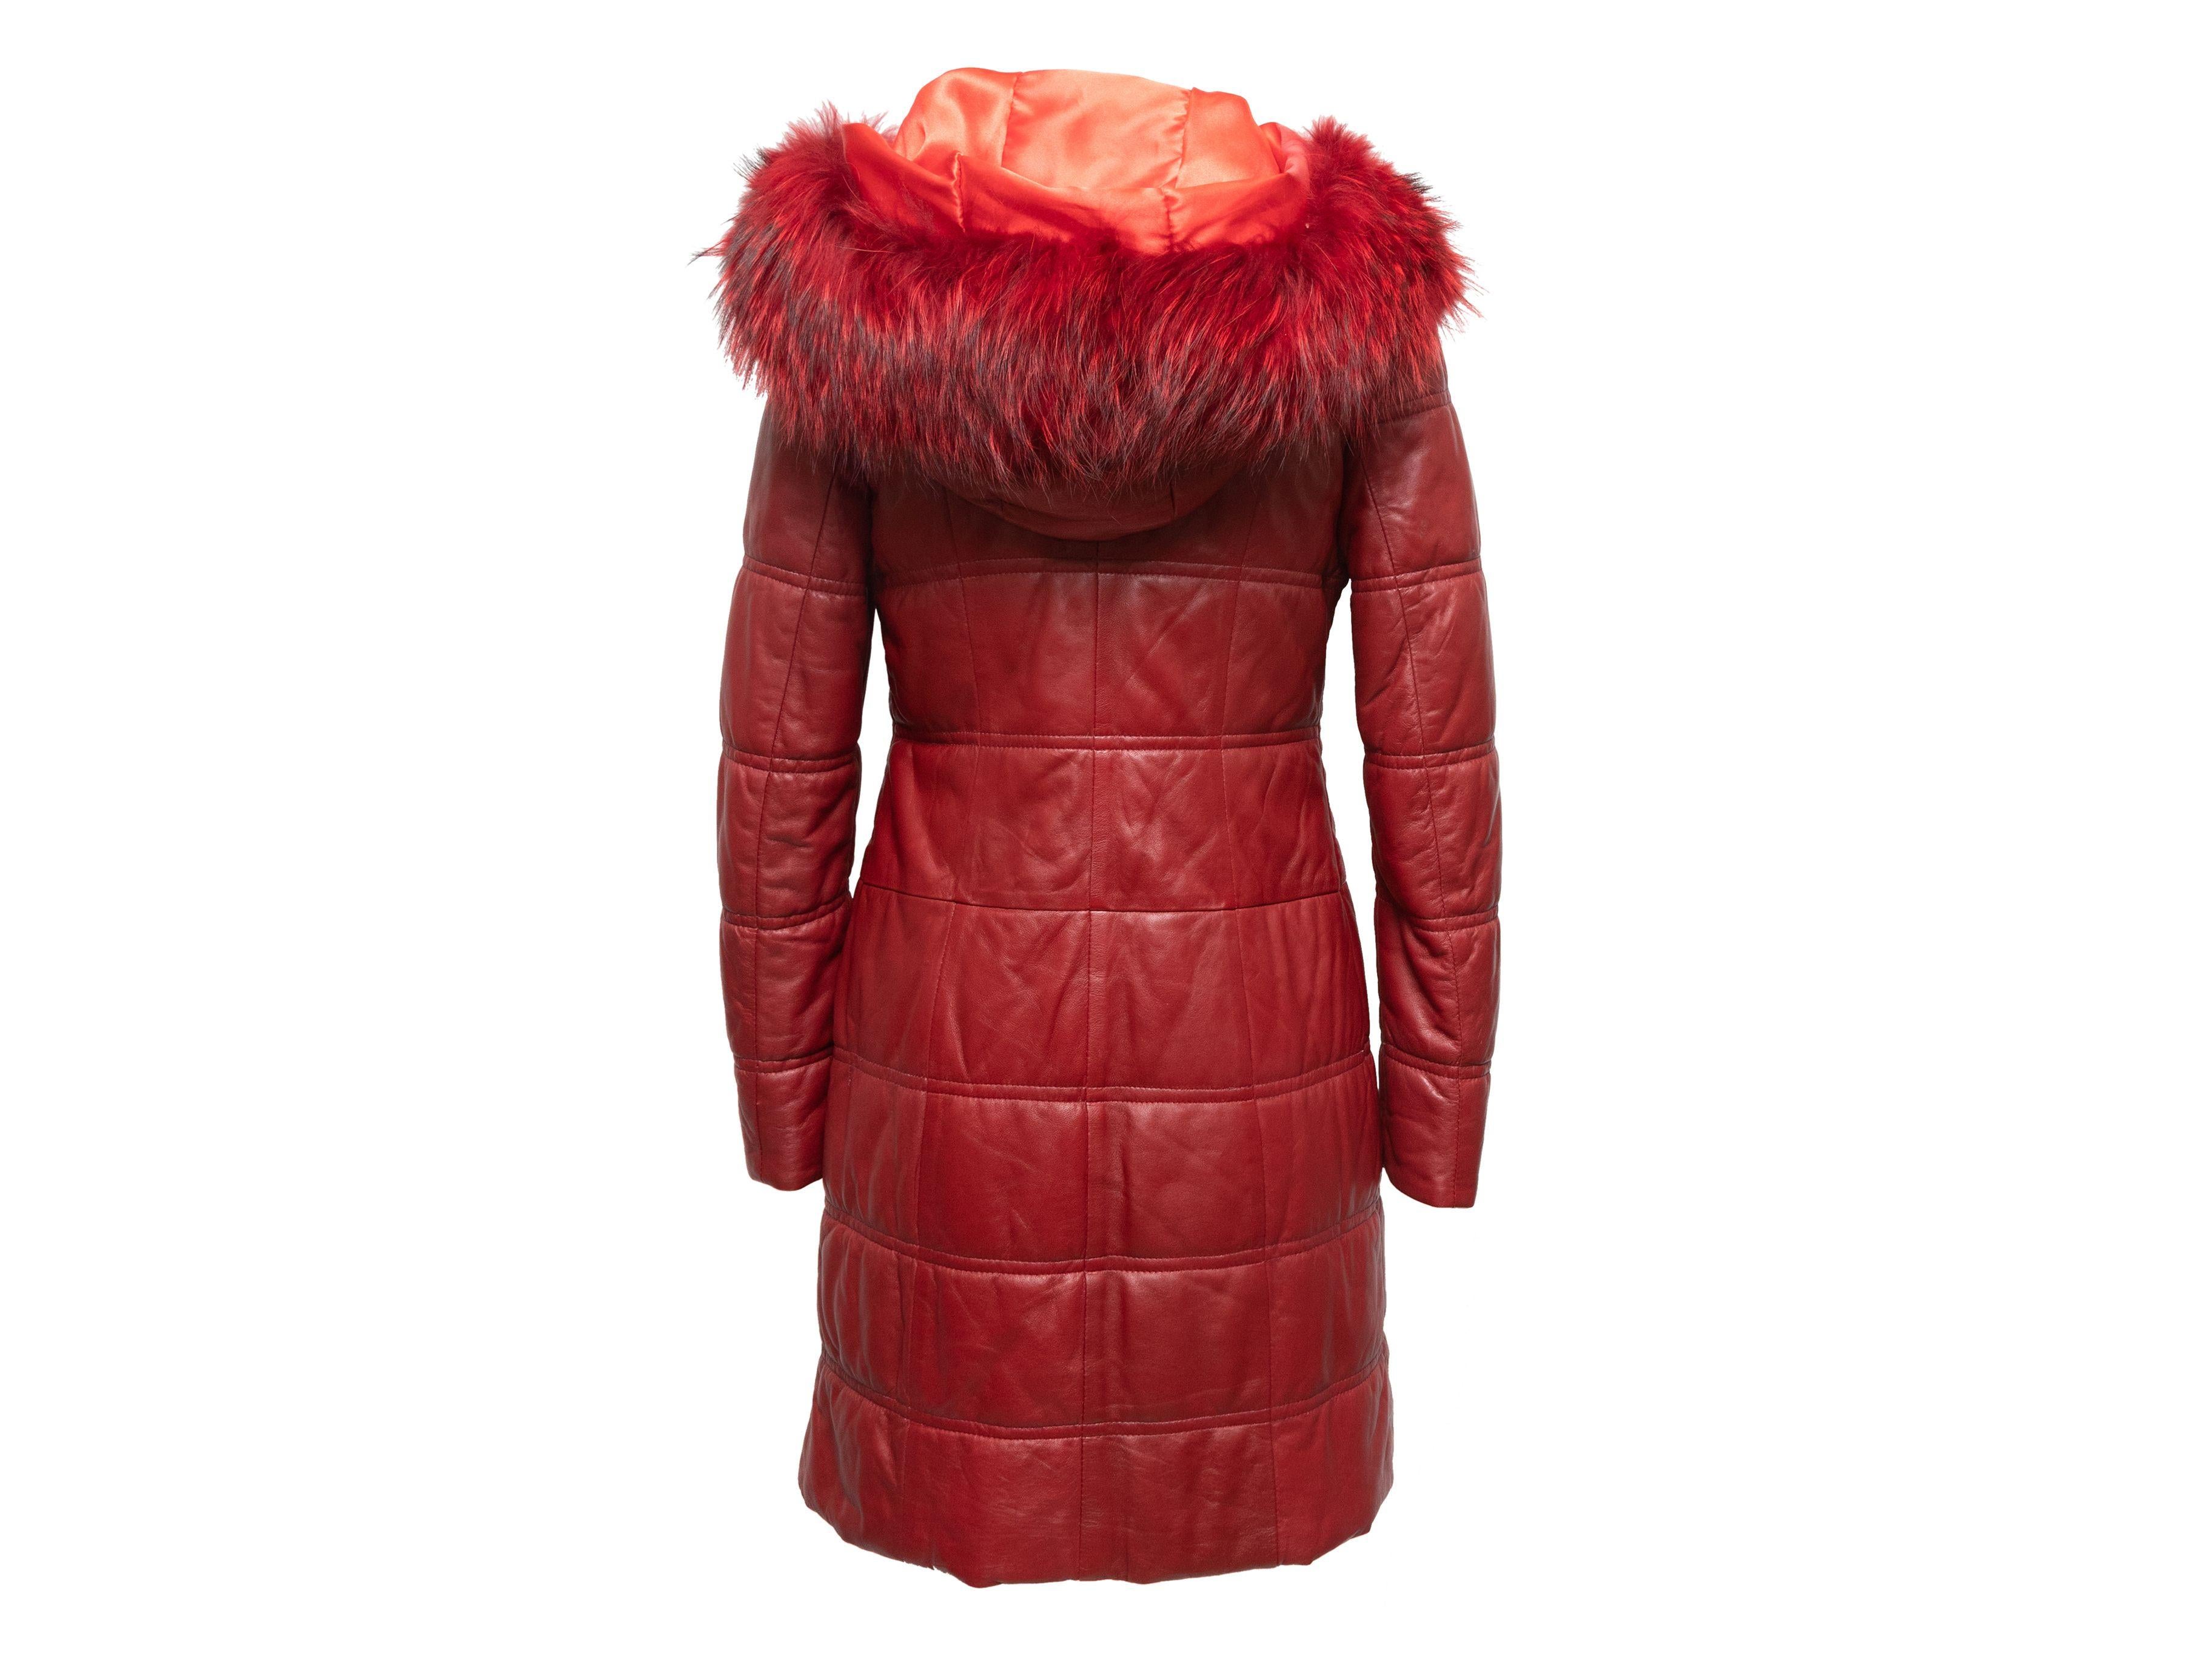 Camerino Red Quilted Leather & Fur-Trimmed Coat 3